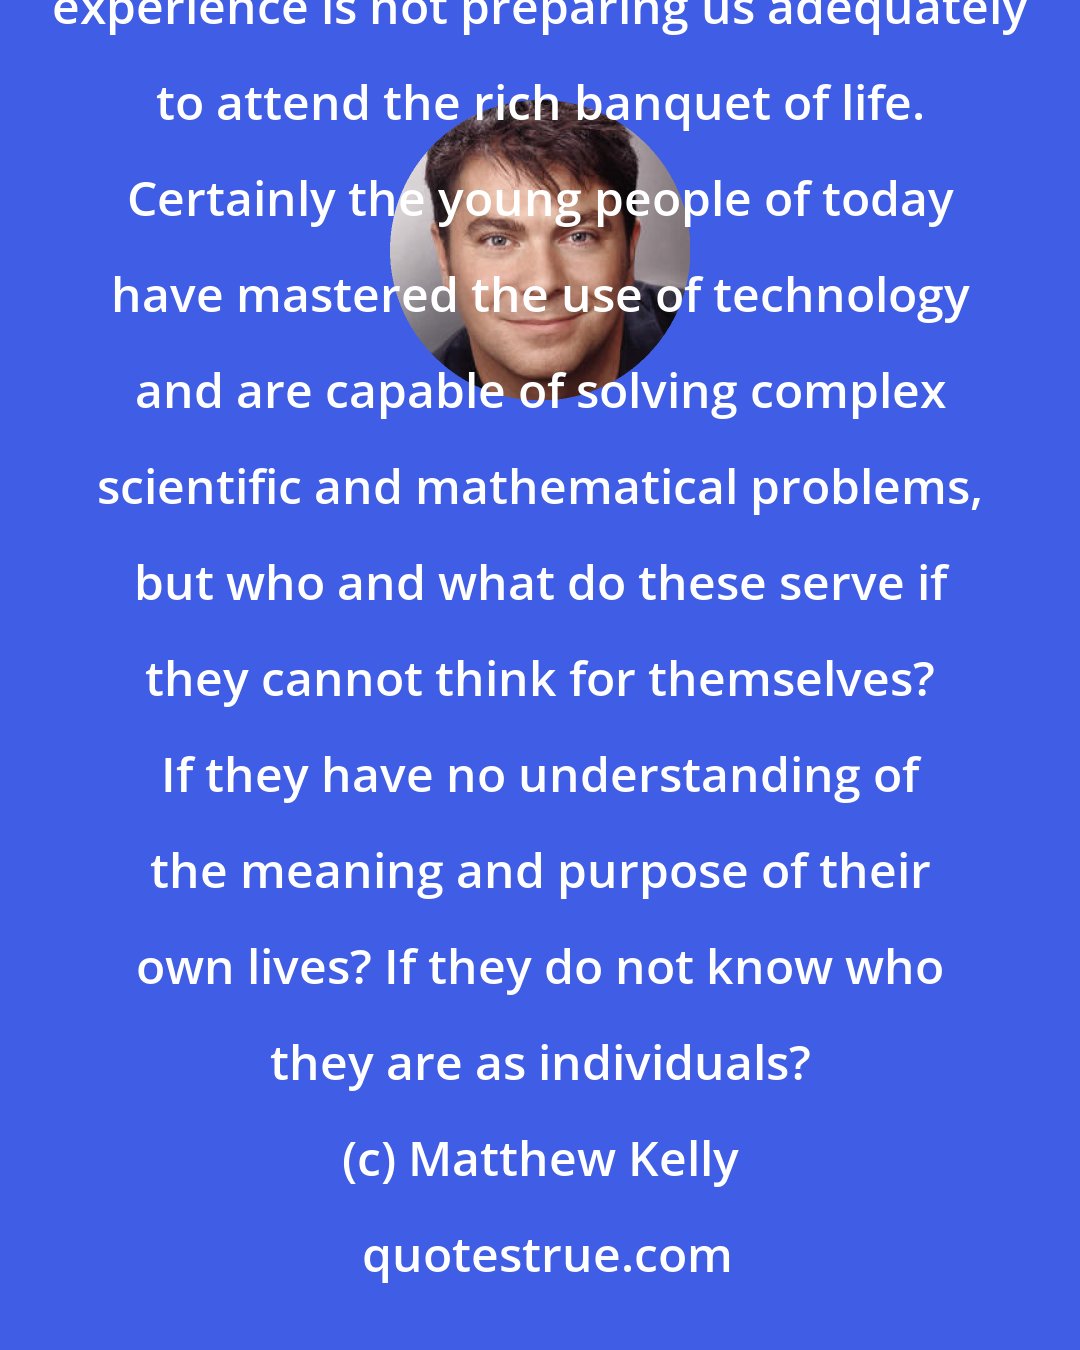 Matthew Kelly: More people have access to education today than ever before. But I cannot help but feel that the modern educational experience is not preparing us adequately to attend the rich banquet of life. Certainly the young people of today have mastered the use of technology and are capable of solving complex scientific and mathematical problems, but who and what do these serve if they cannot think for themselves? If they have no understanding of the meaning and purpose of their own lives? If they do not know who they are as individuals?